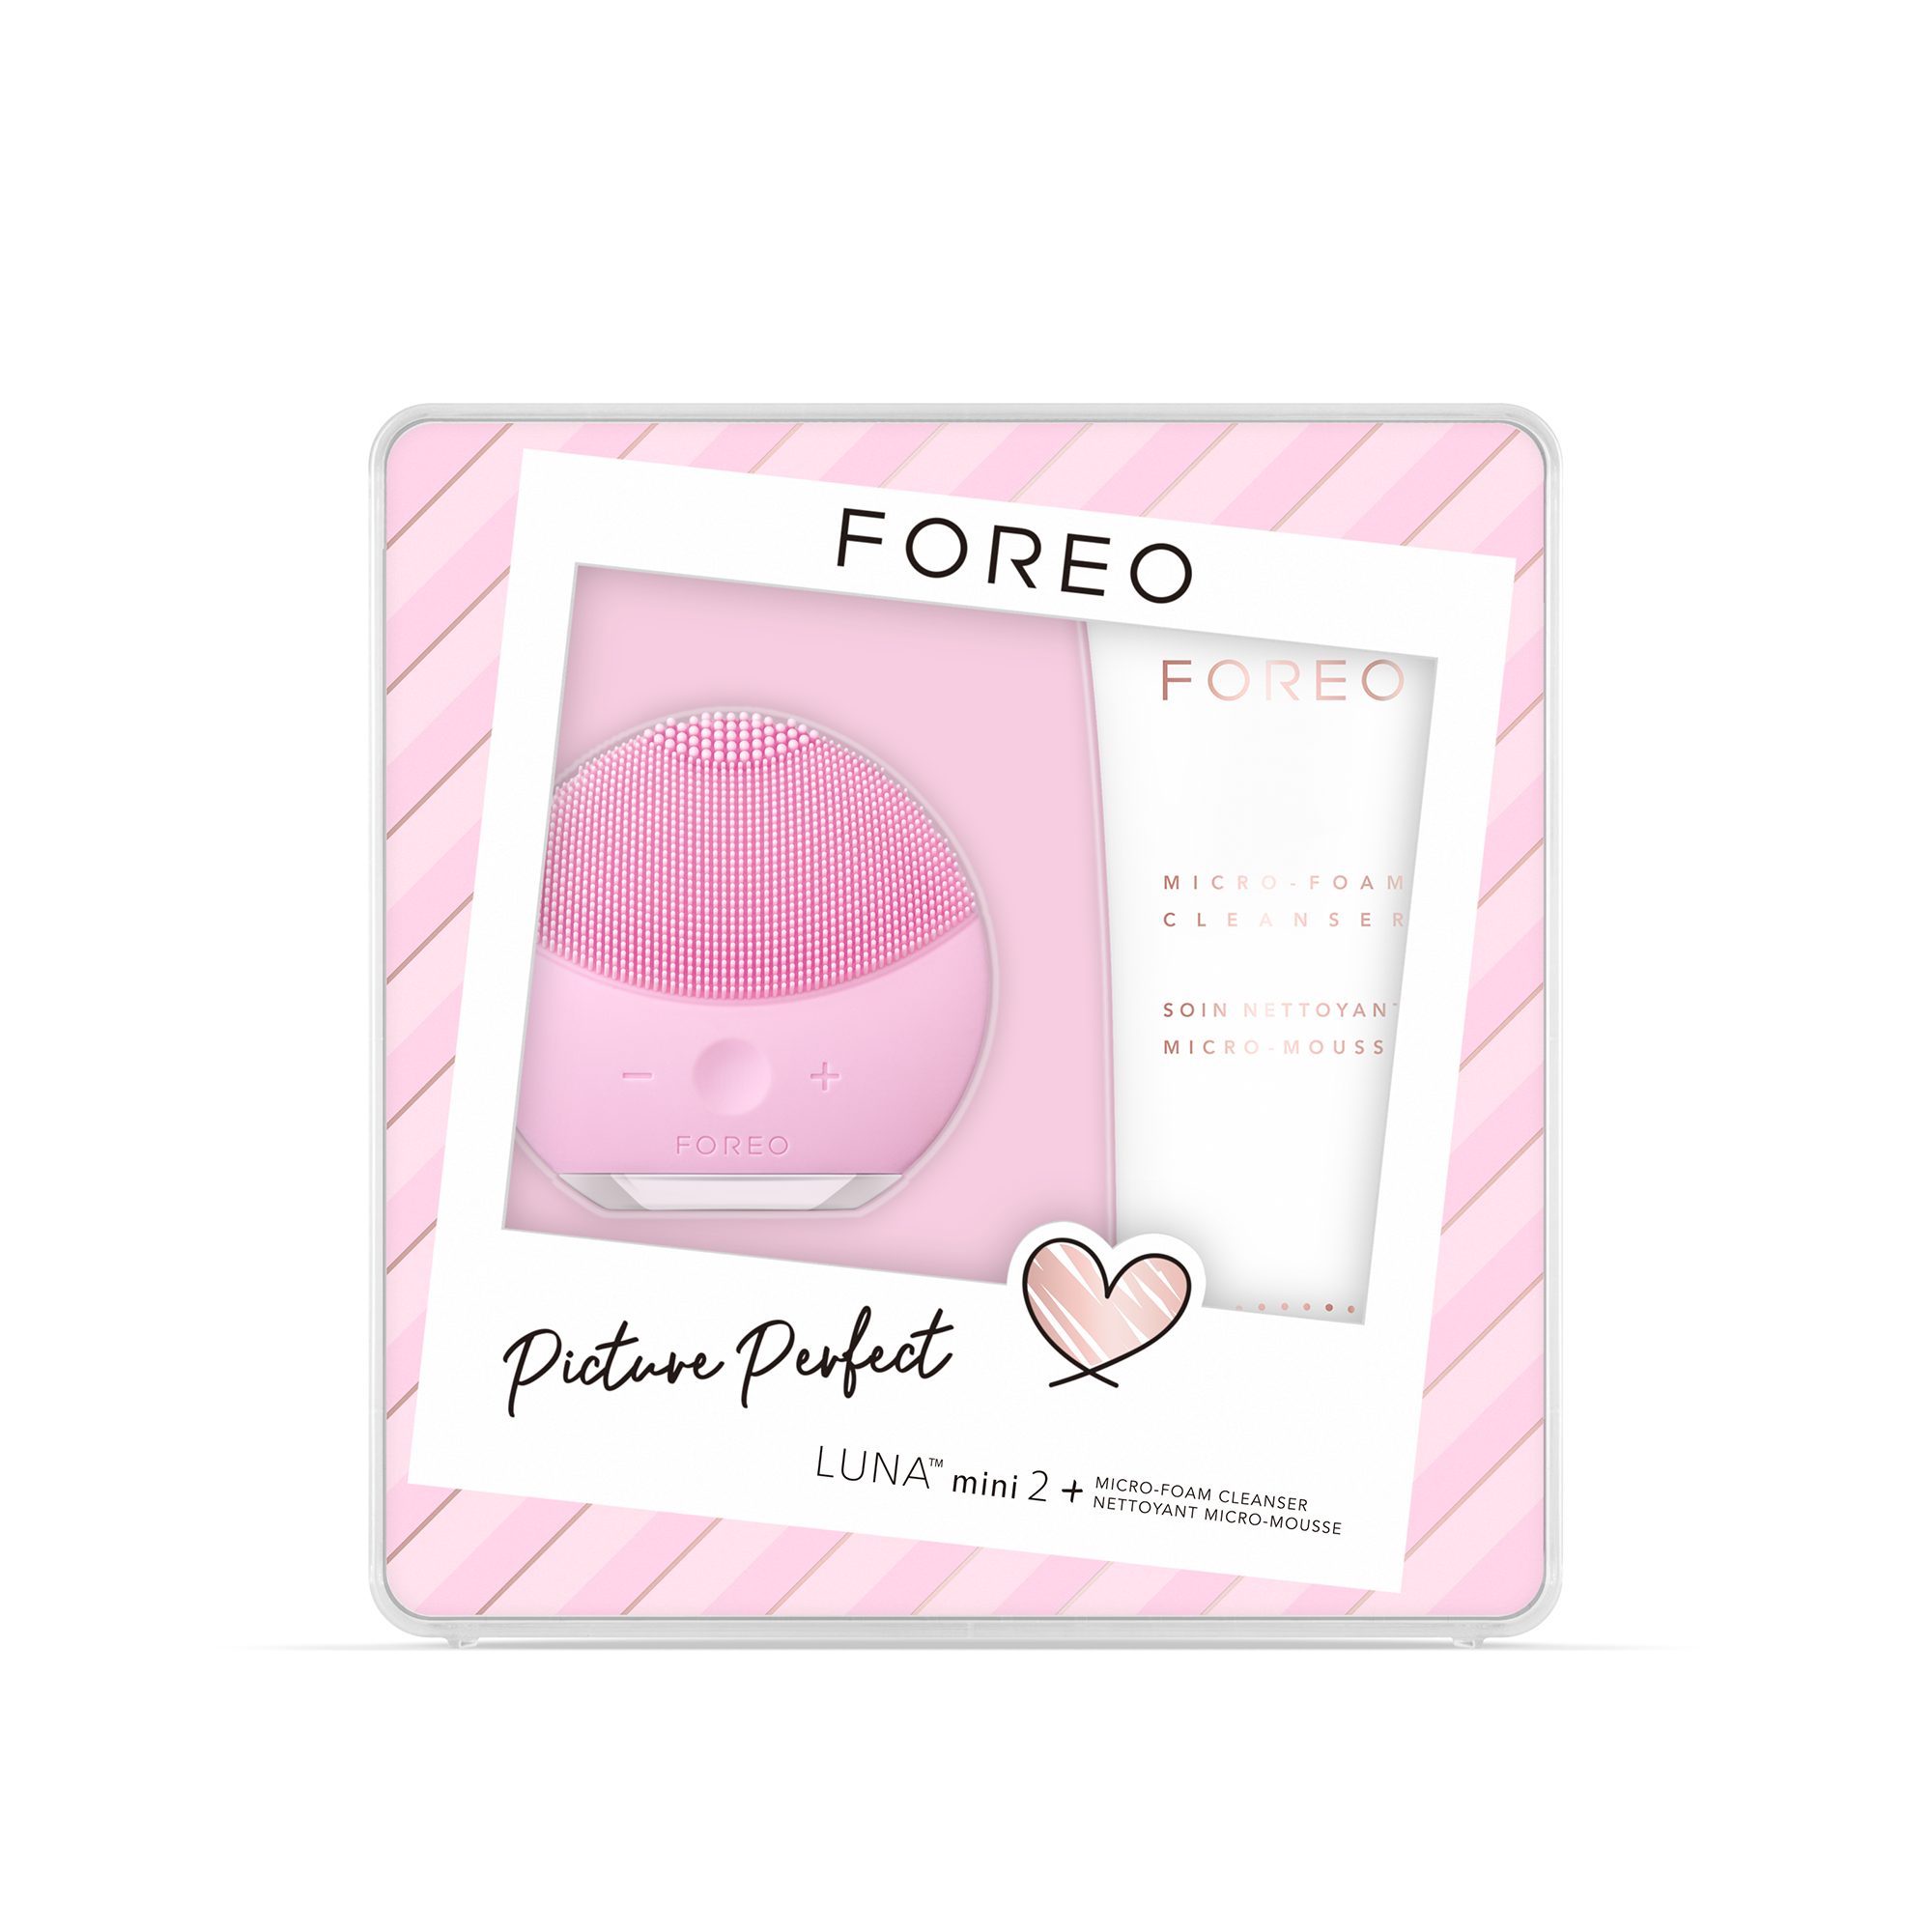 FOREO_PicturePerfectSet_Packaging_LUNAmini2+Cleanser_FRONT